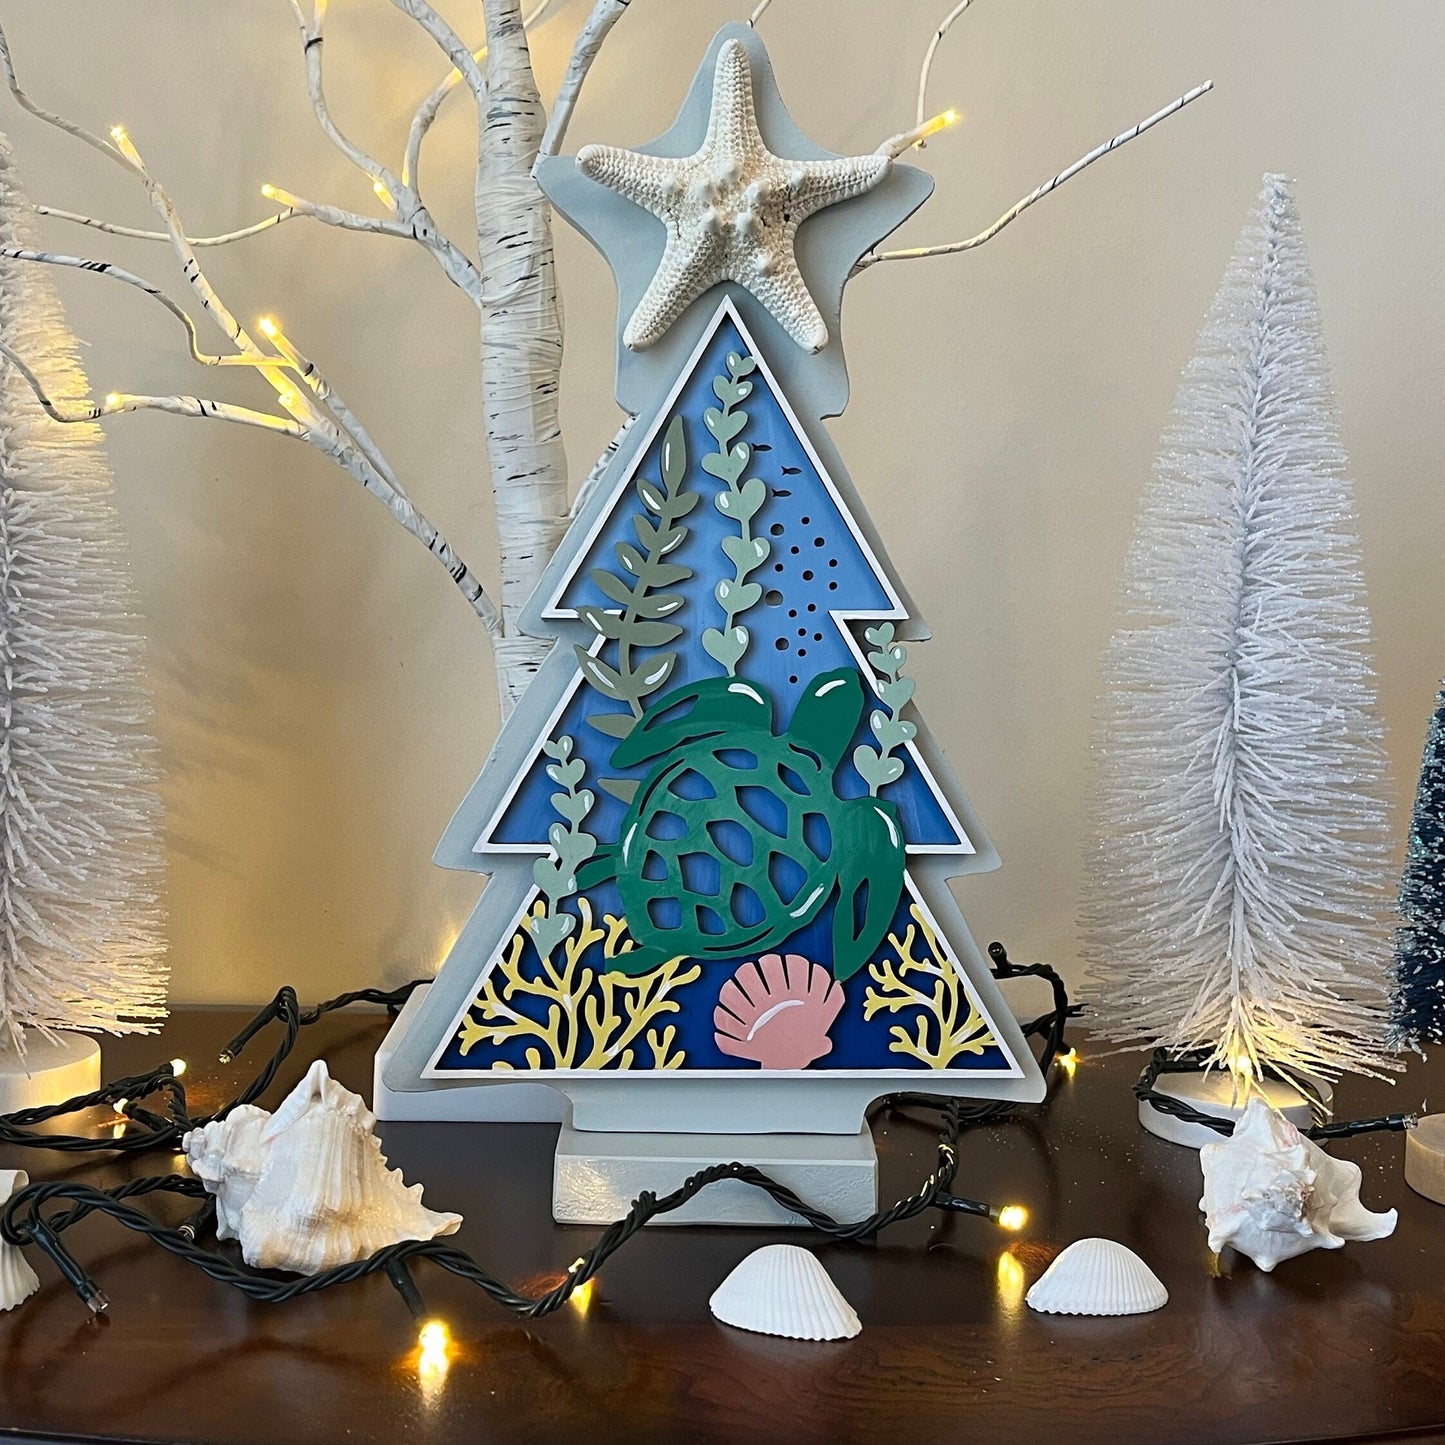 A 12-inch tall wooden standing tree shaped decor with a starfish on top and a sea turtle under the sea hand painted scene on the center.